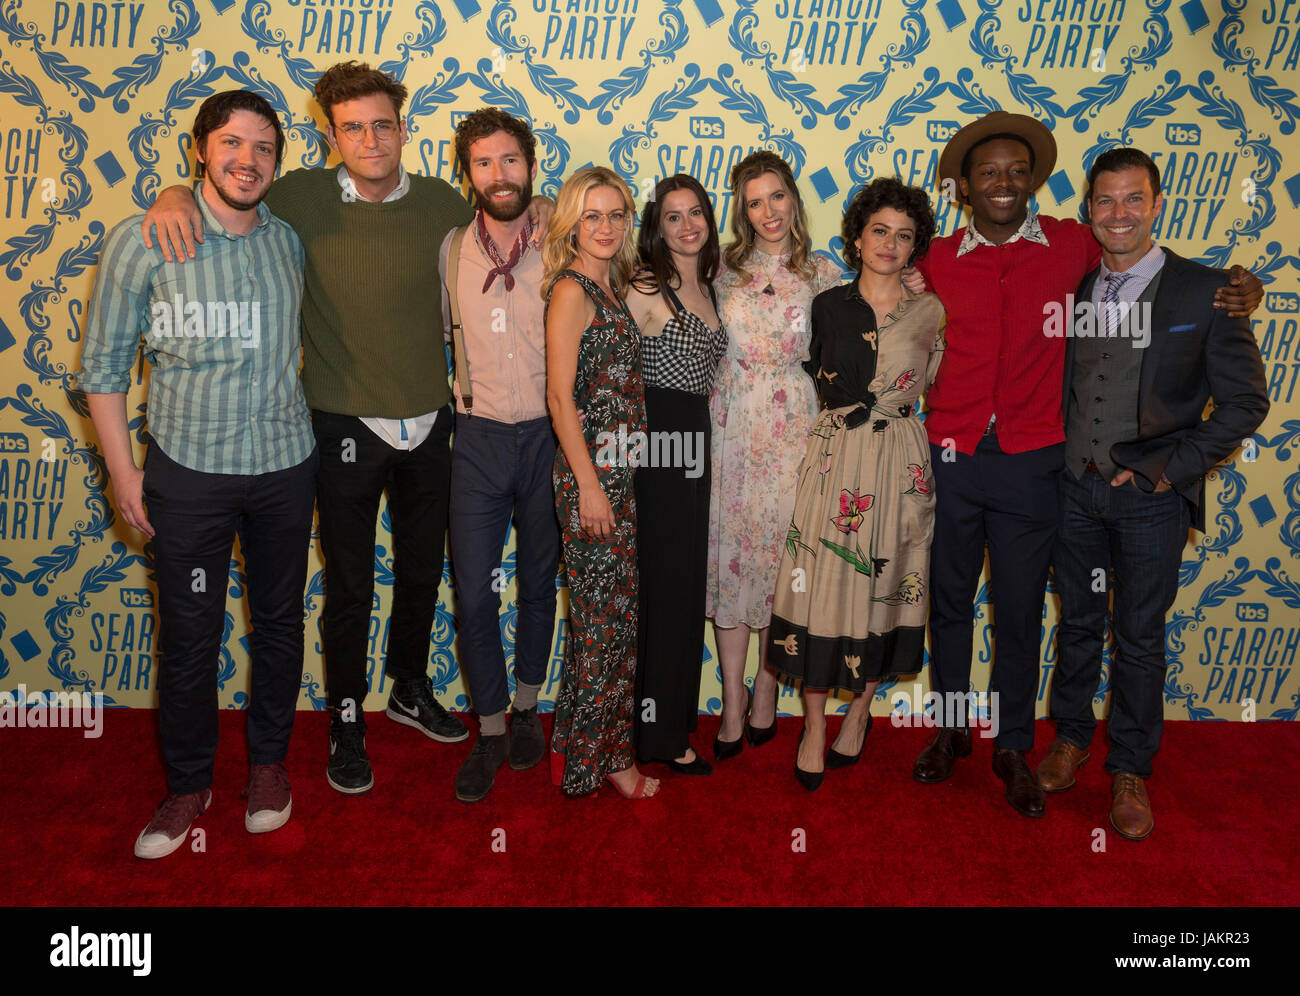 New York, United States. 06th June, 2017. Tom Philip, John Reynolds, Charles Rogers, Meredith Hagner, Lilly Burns, Sarah-Violet Bliss, Alia Shawkat, Brandon Michael Hall, Brett Weitz attend Search Party comedy by TBS at McKittrick Hotel Credit: Lev Radin/Pacific Press/Alamy Live News Stock Photo